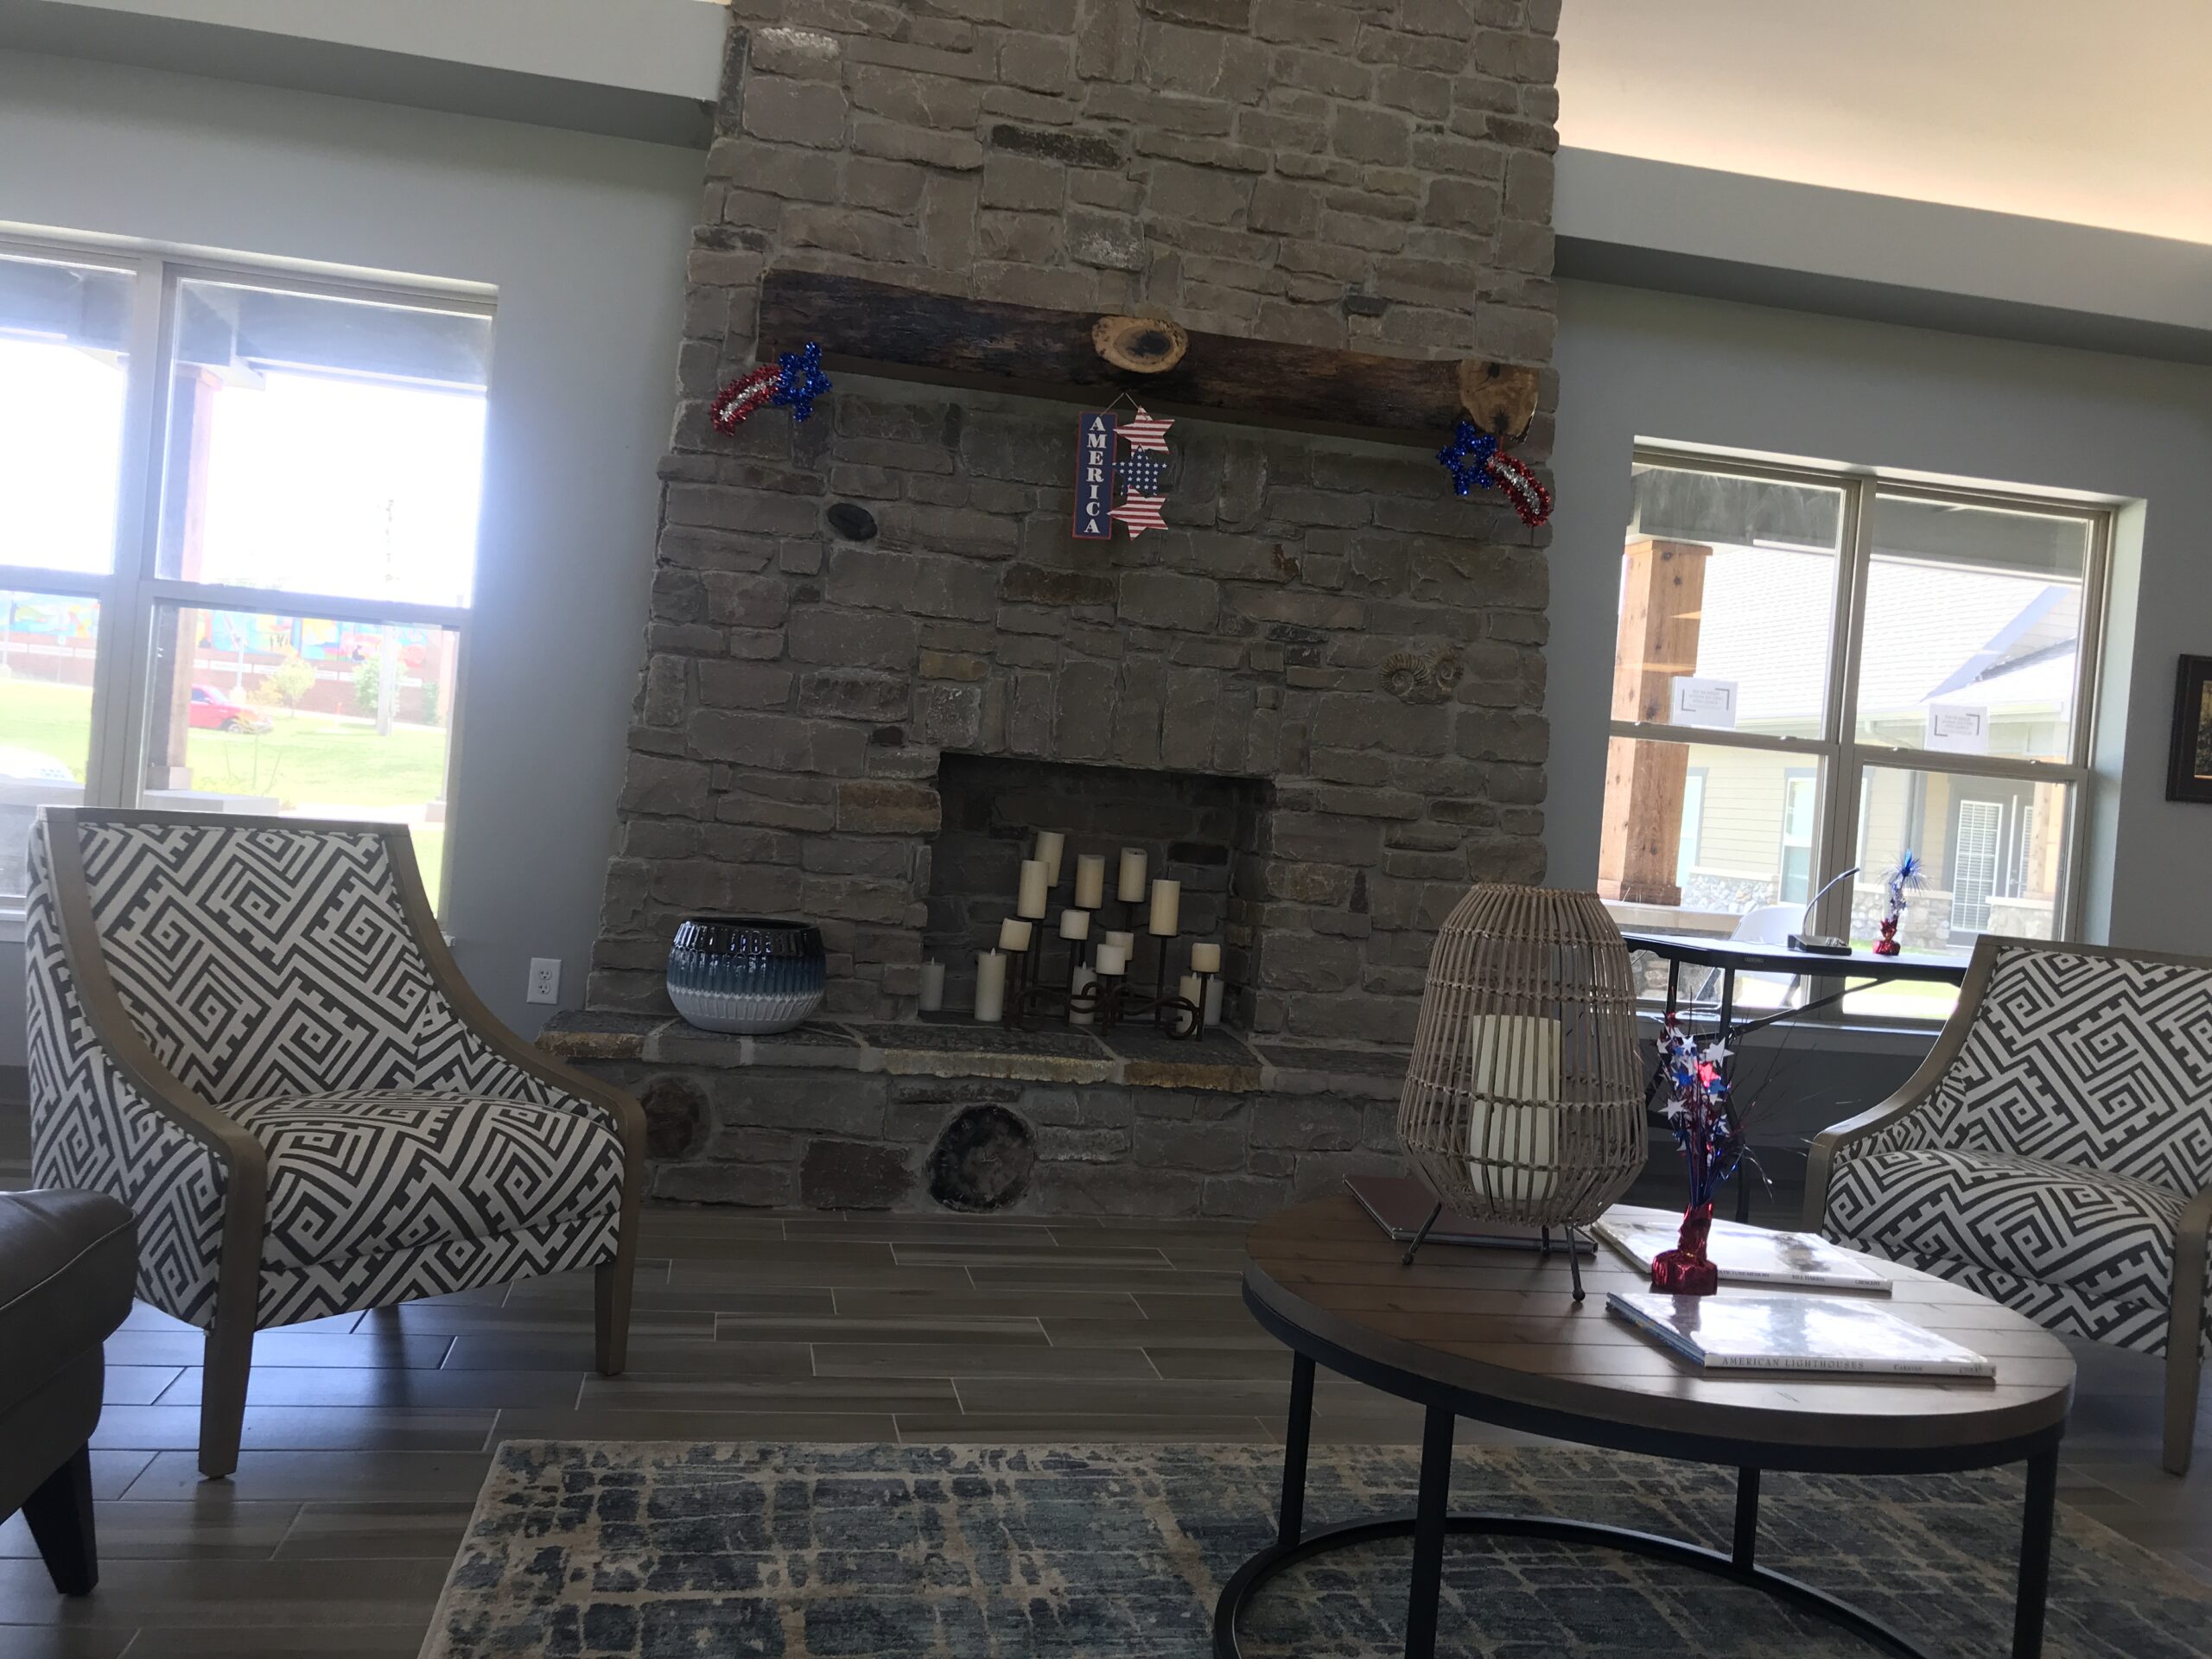 Sitting area with fireplace, decorated for the 4th of July